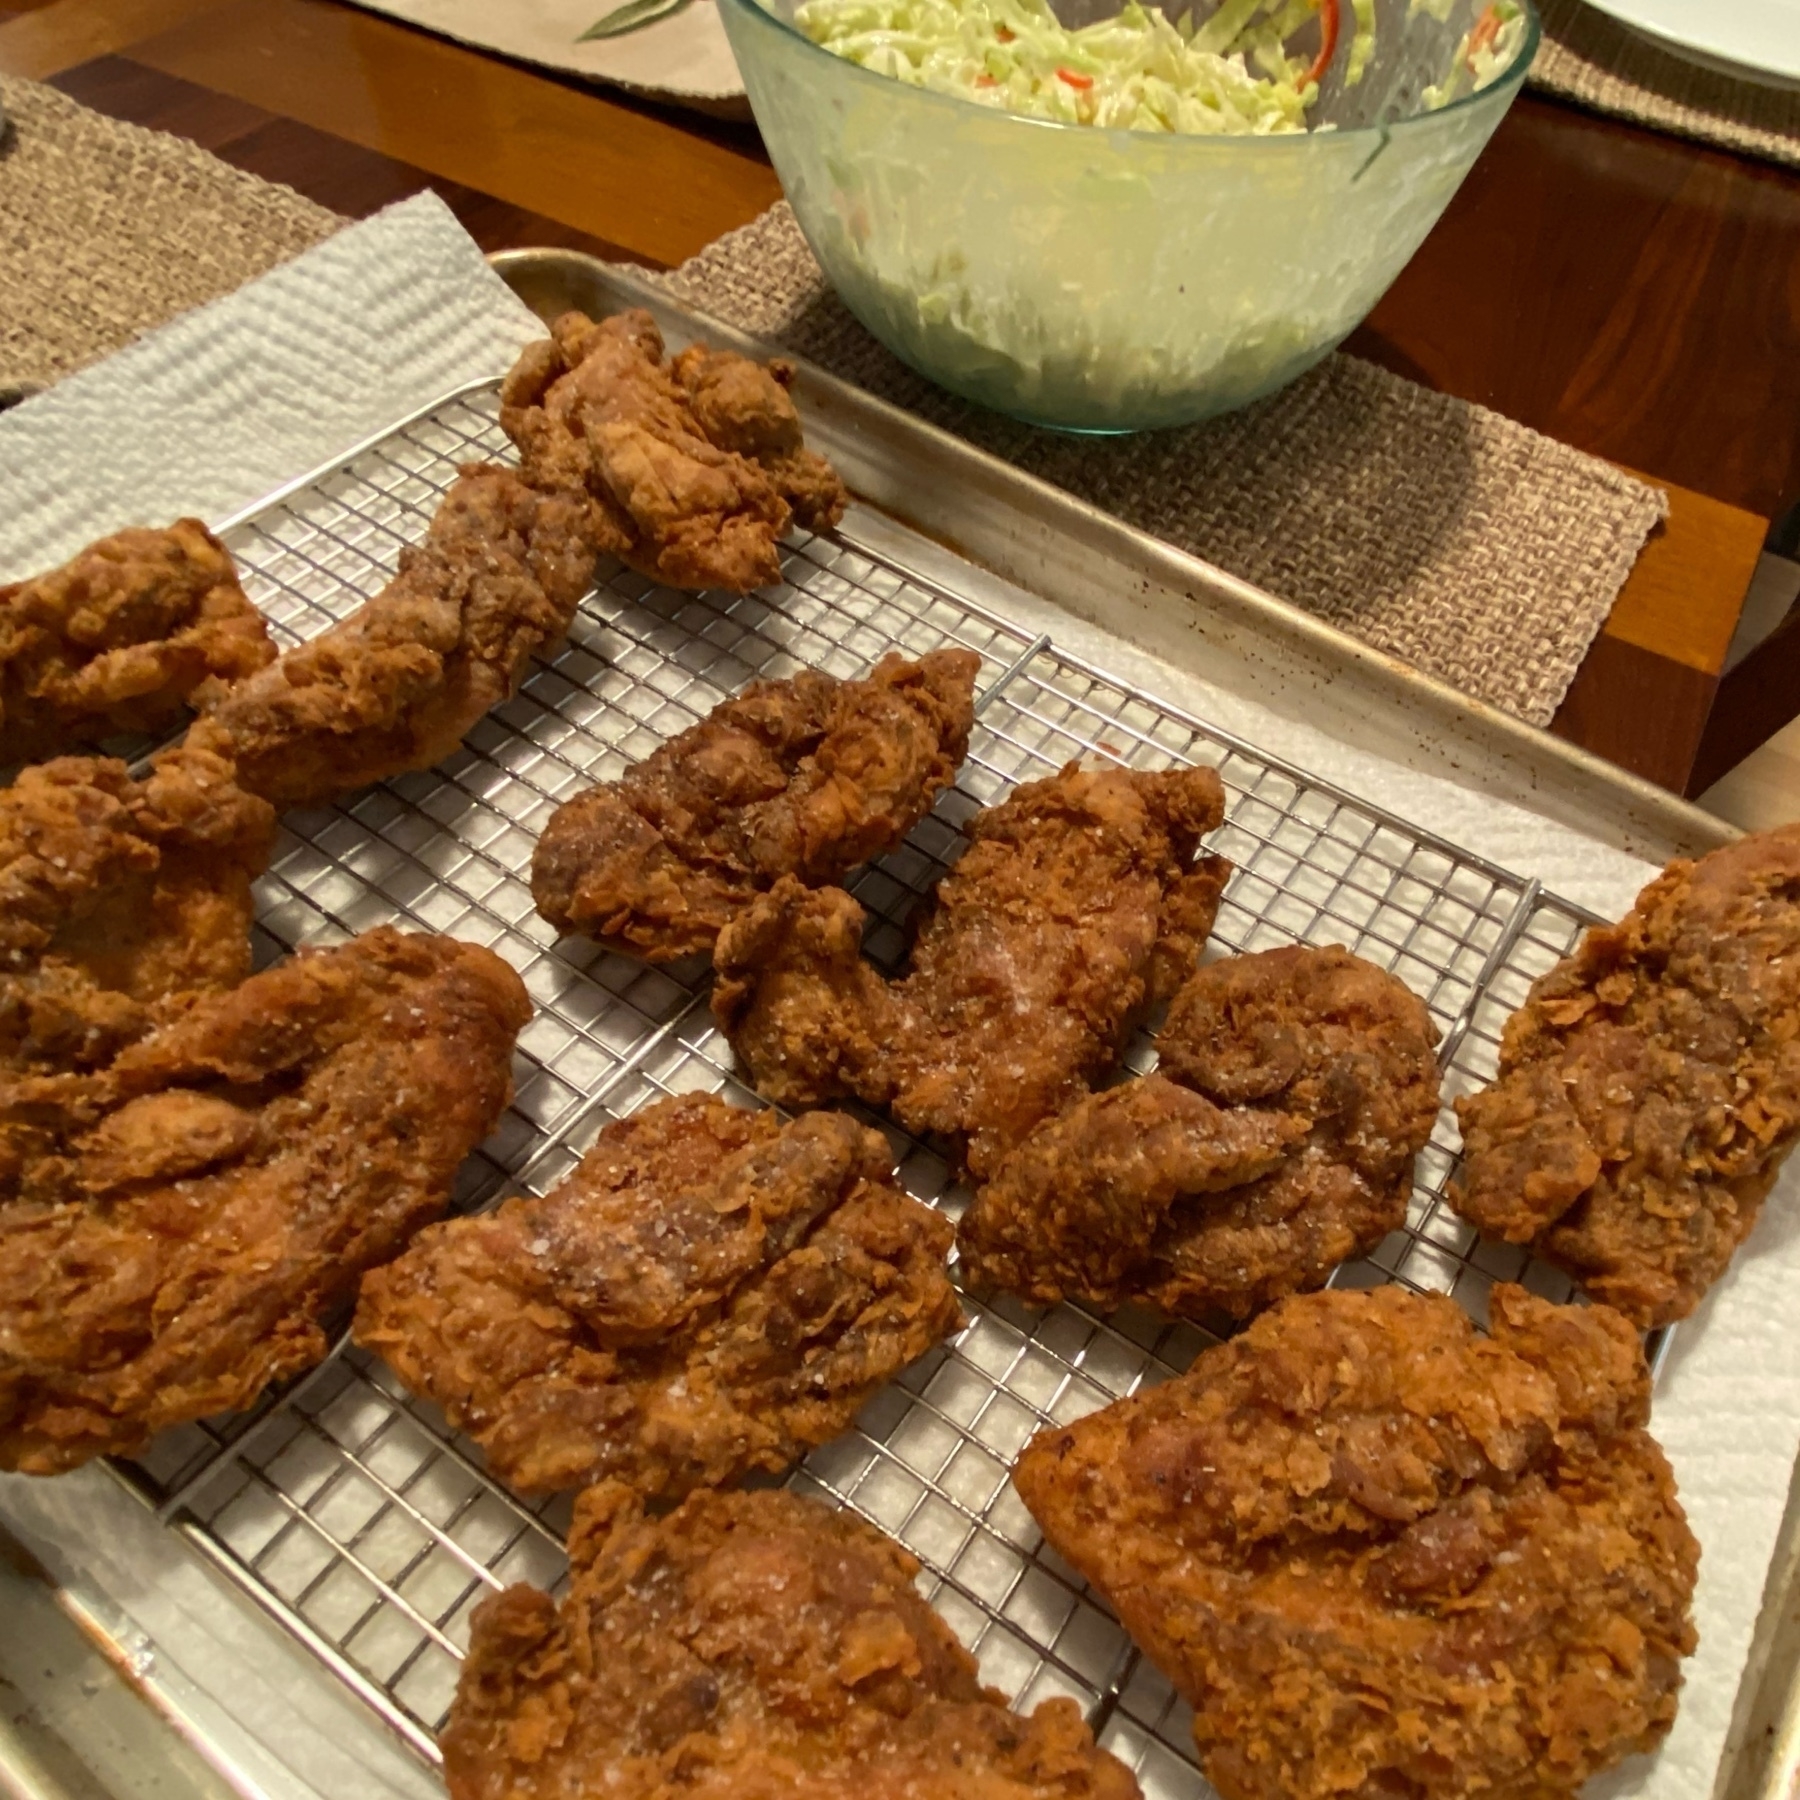 fried chicken on a baking sheet with slaw to the side (slaw has ripe red Santa Fe pepper slices).